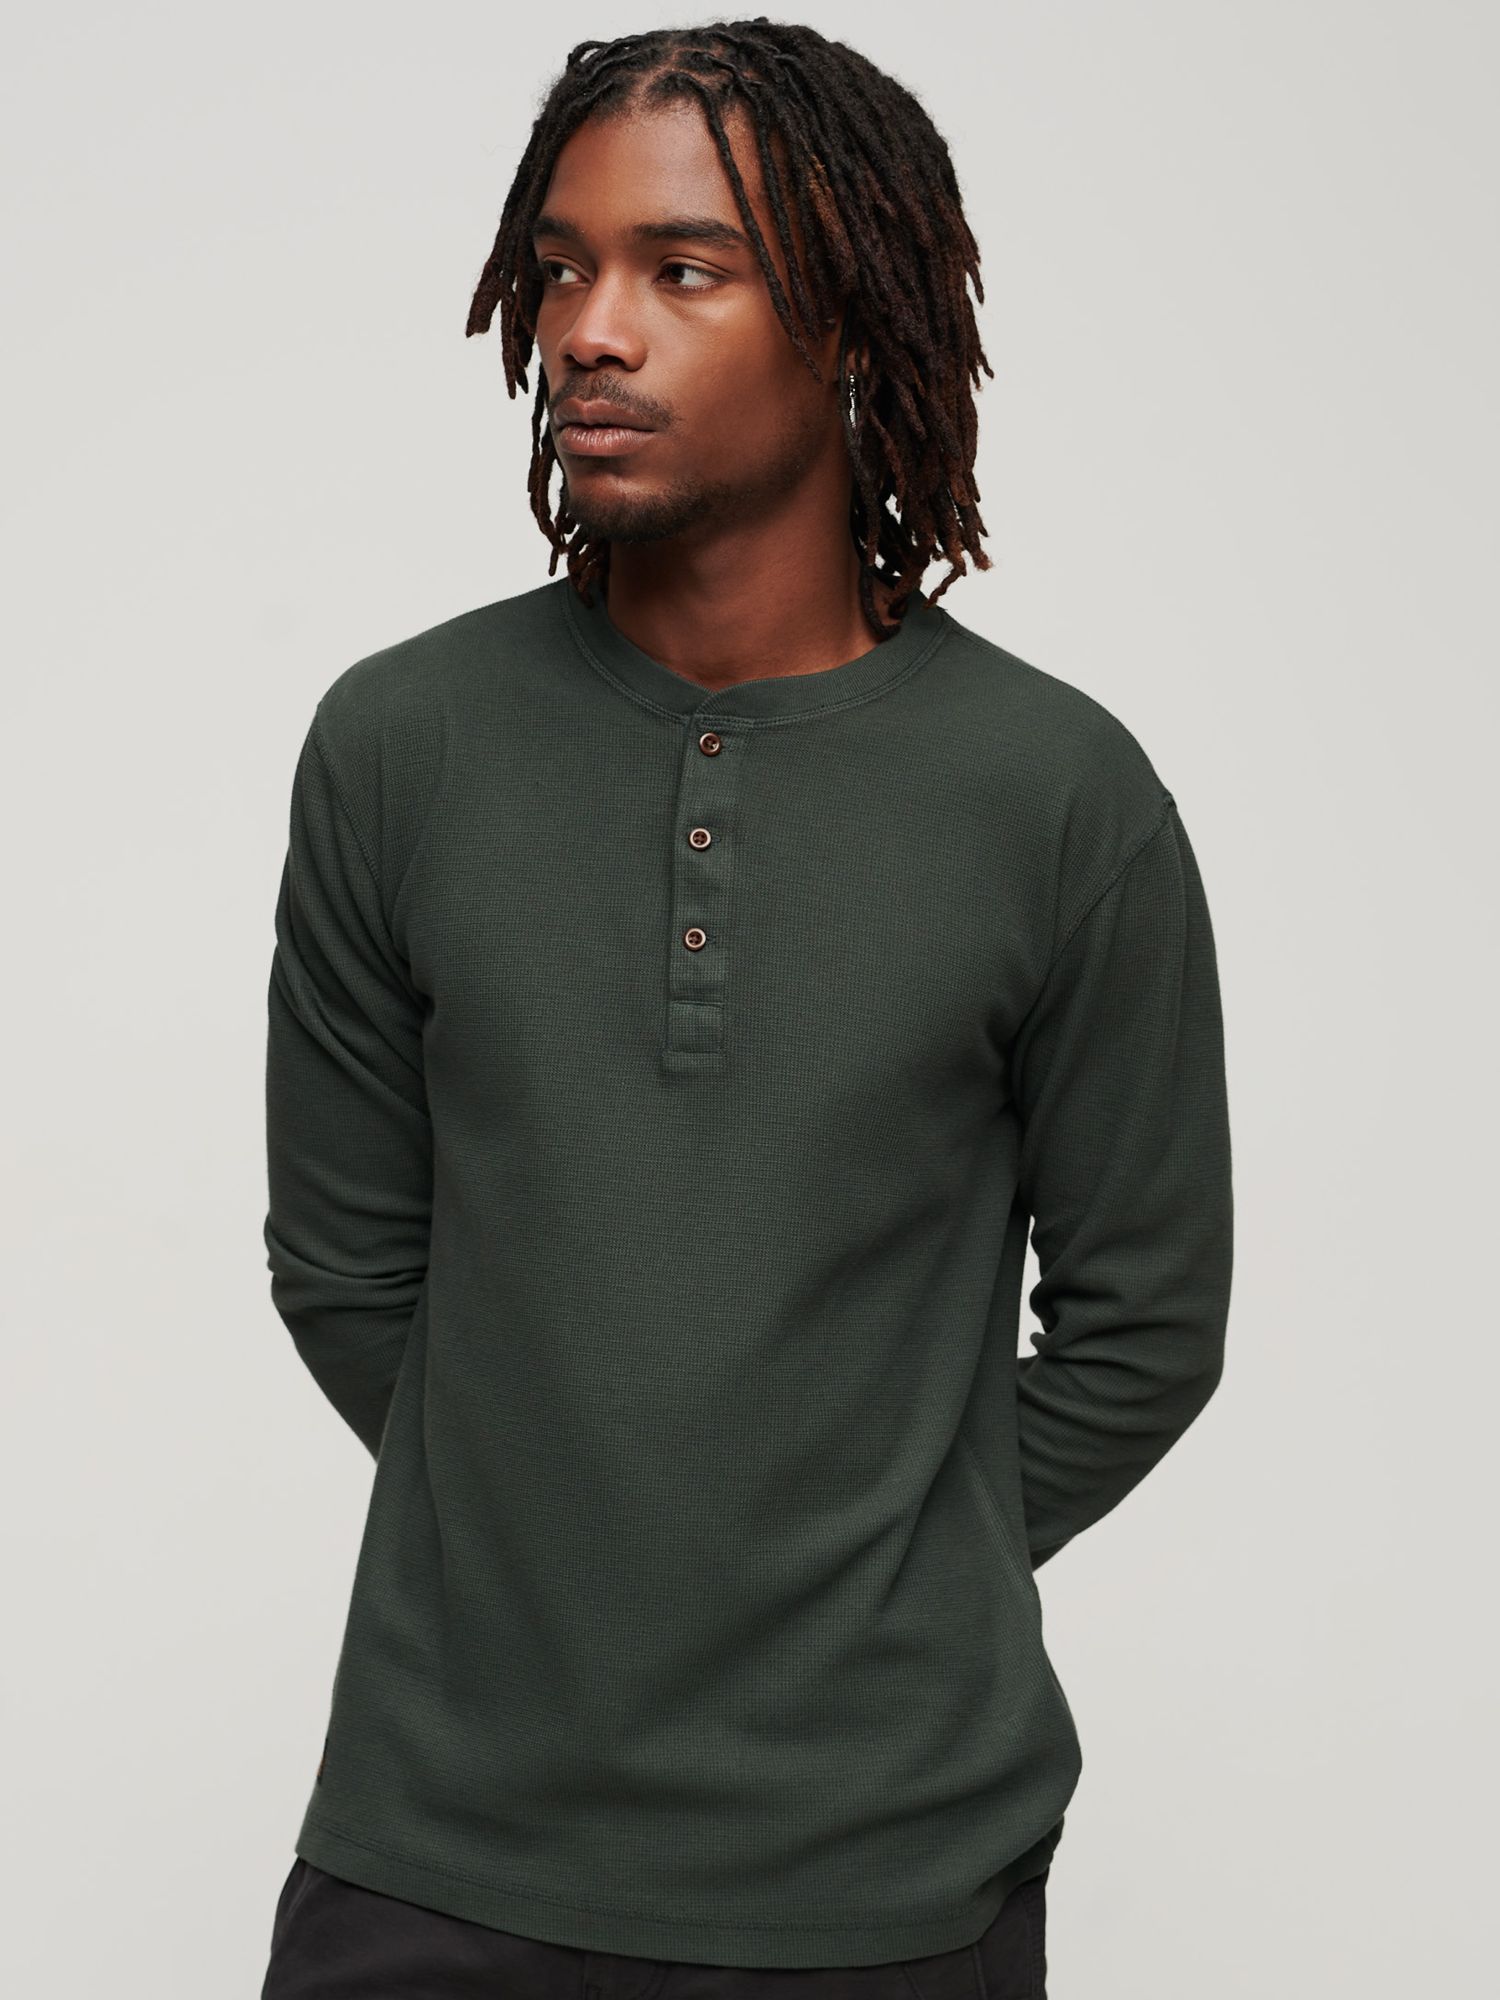 Men's - Organic Cotton Vintage Logo Embroidered Henley Top in